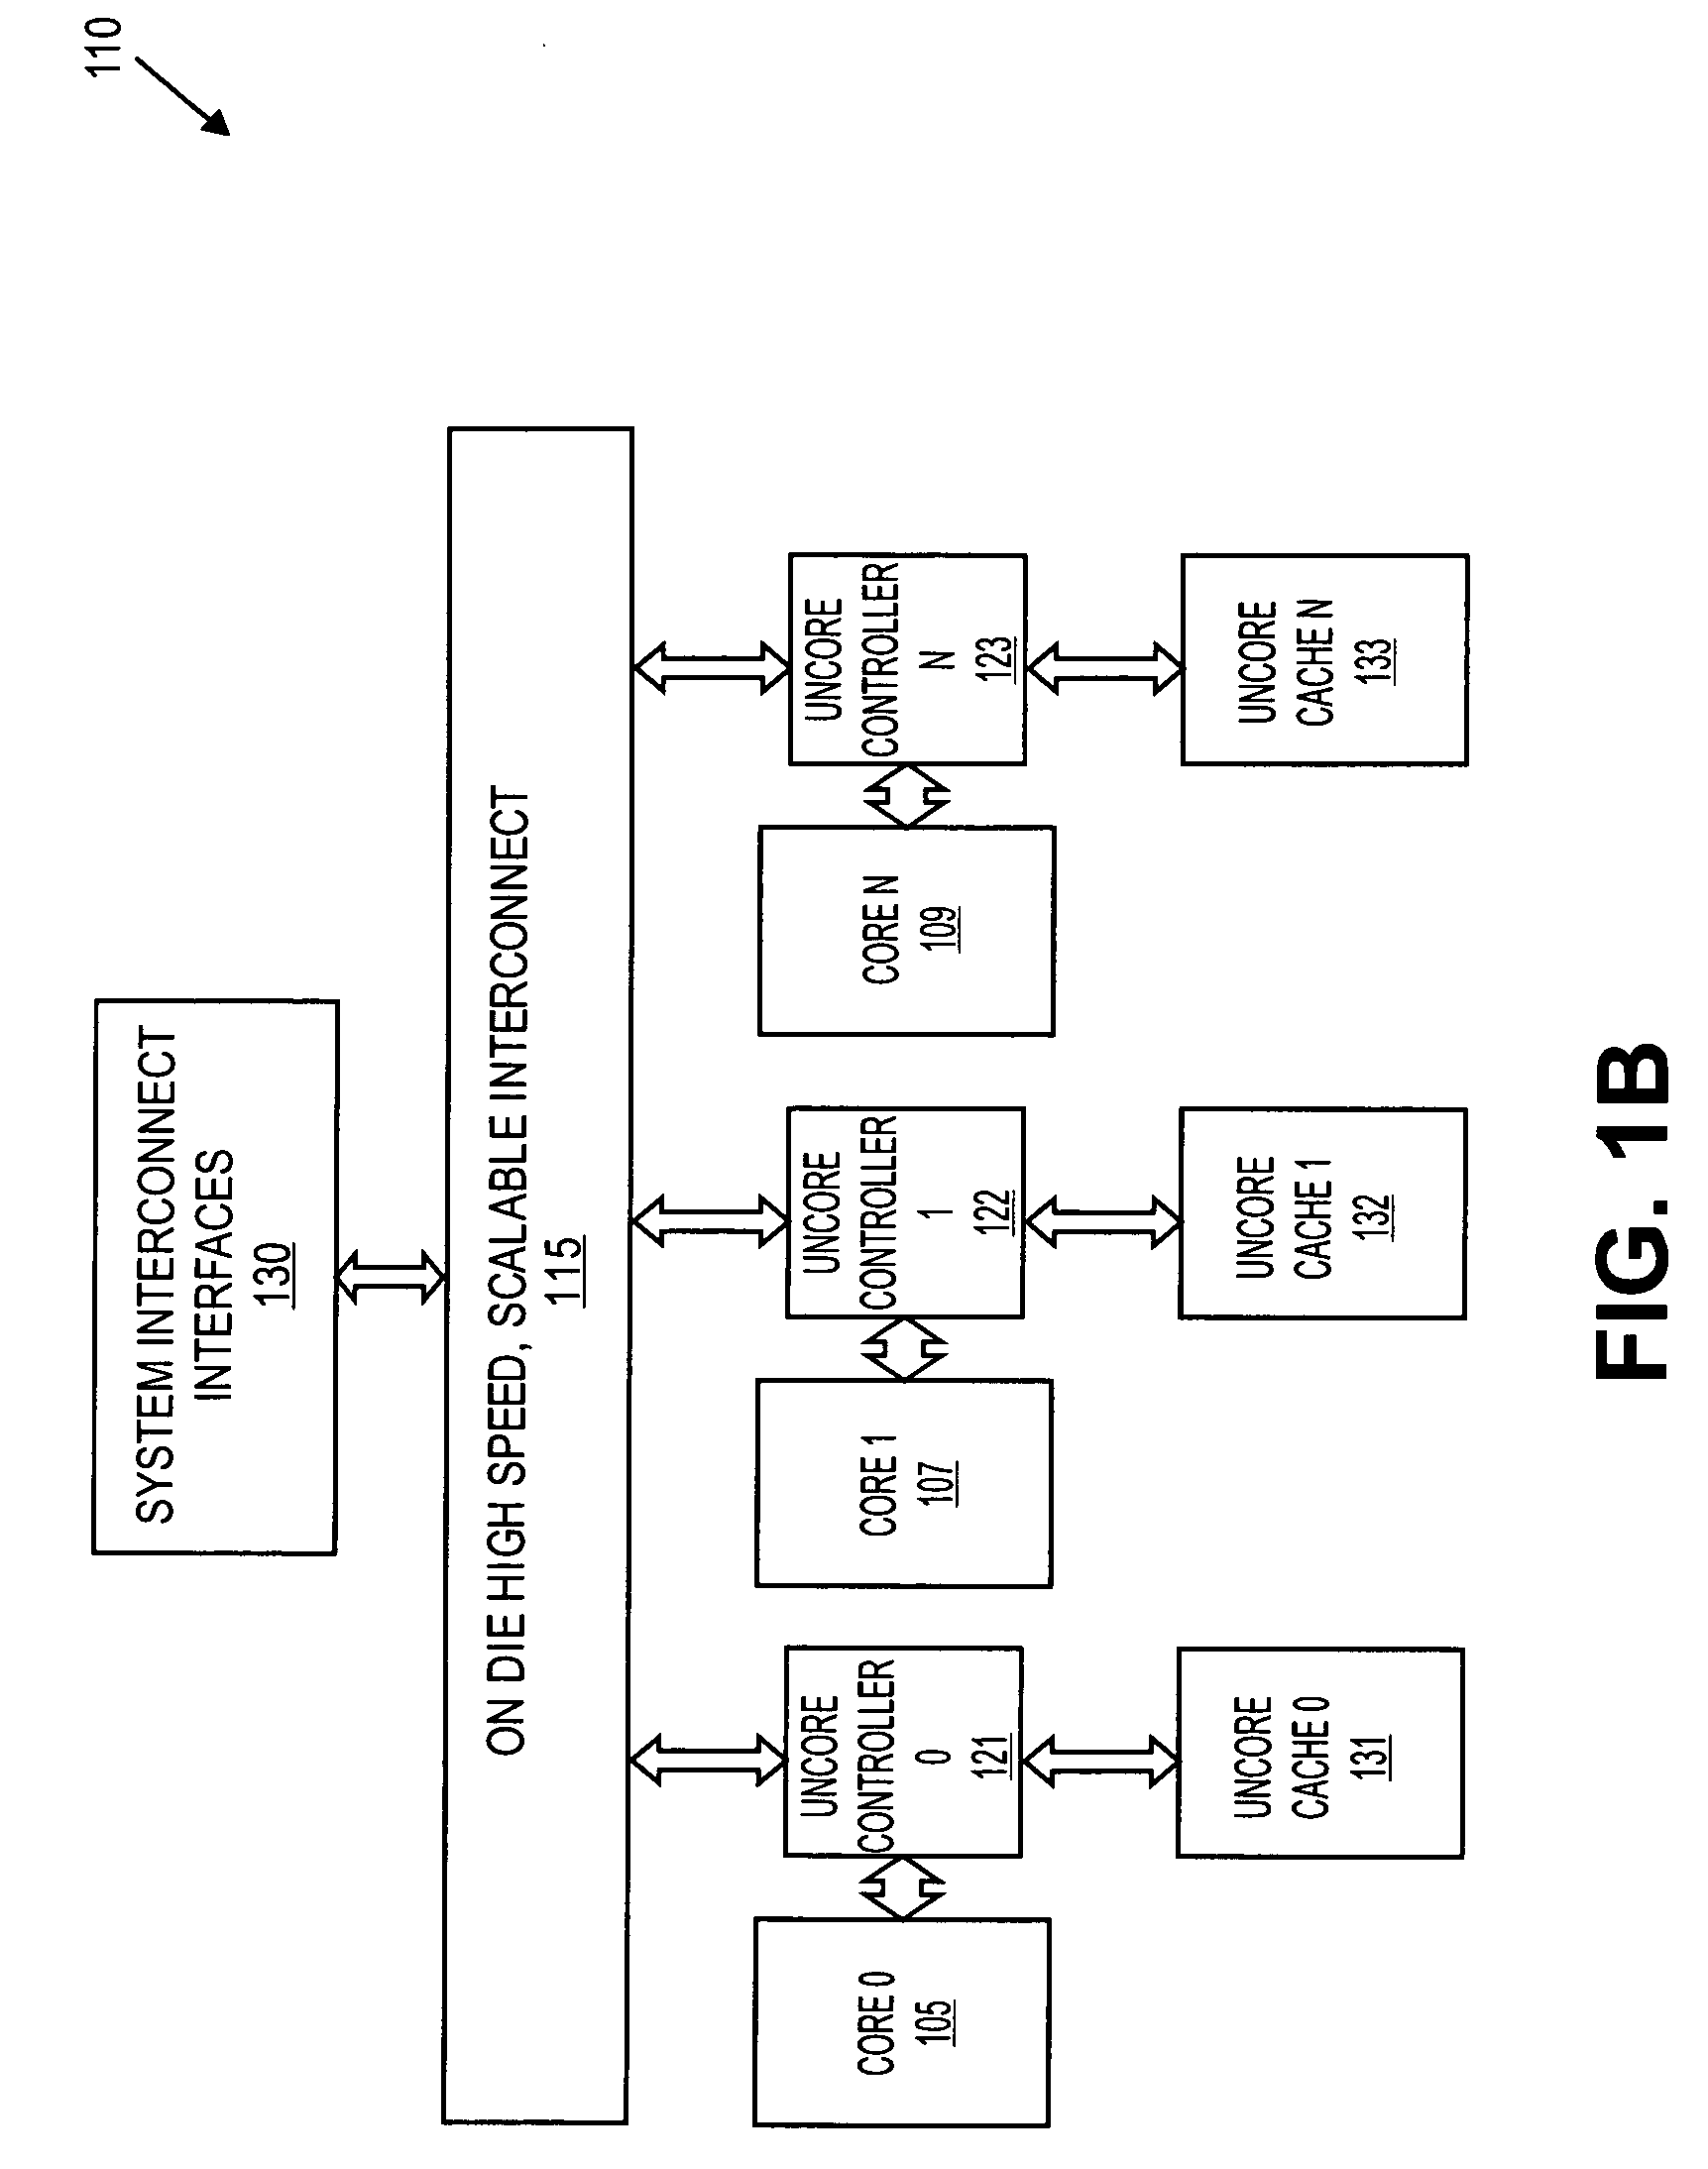 Cache coherency sequencing implementation and adaptive LLC access priority control for CMP